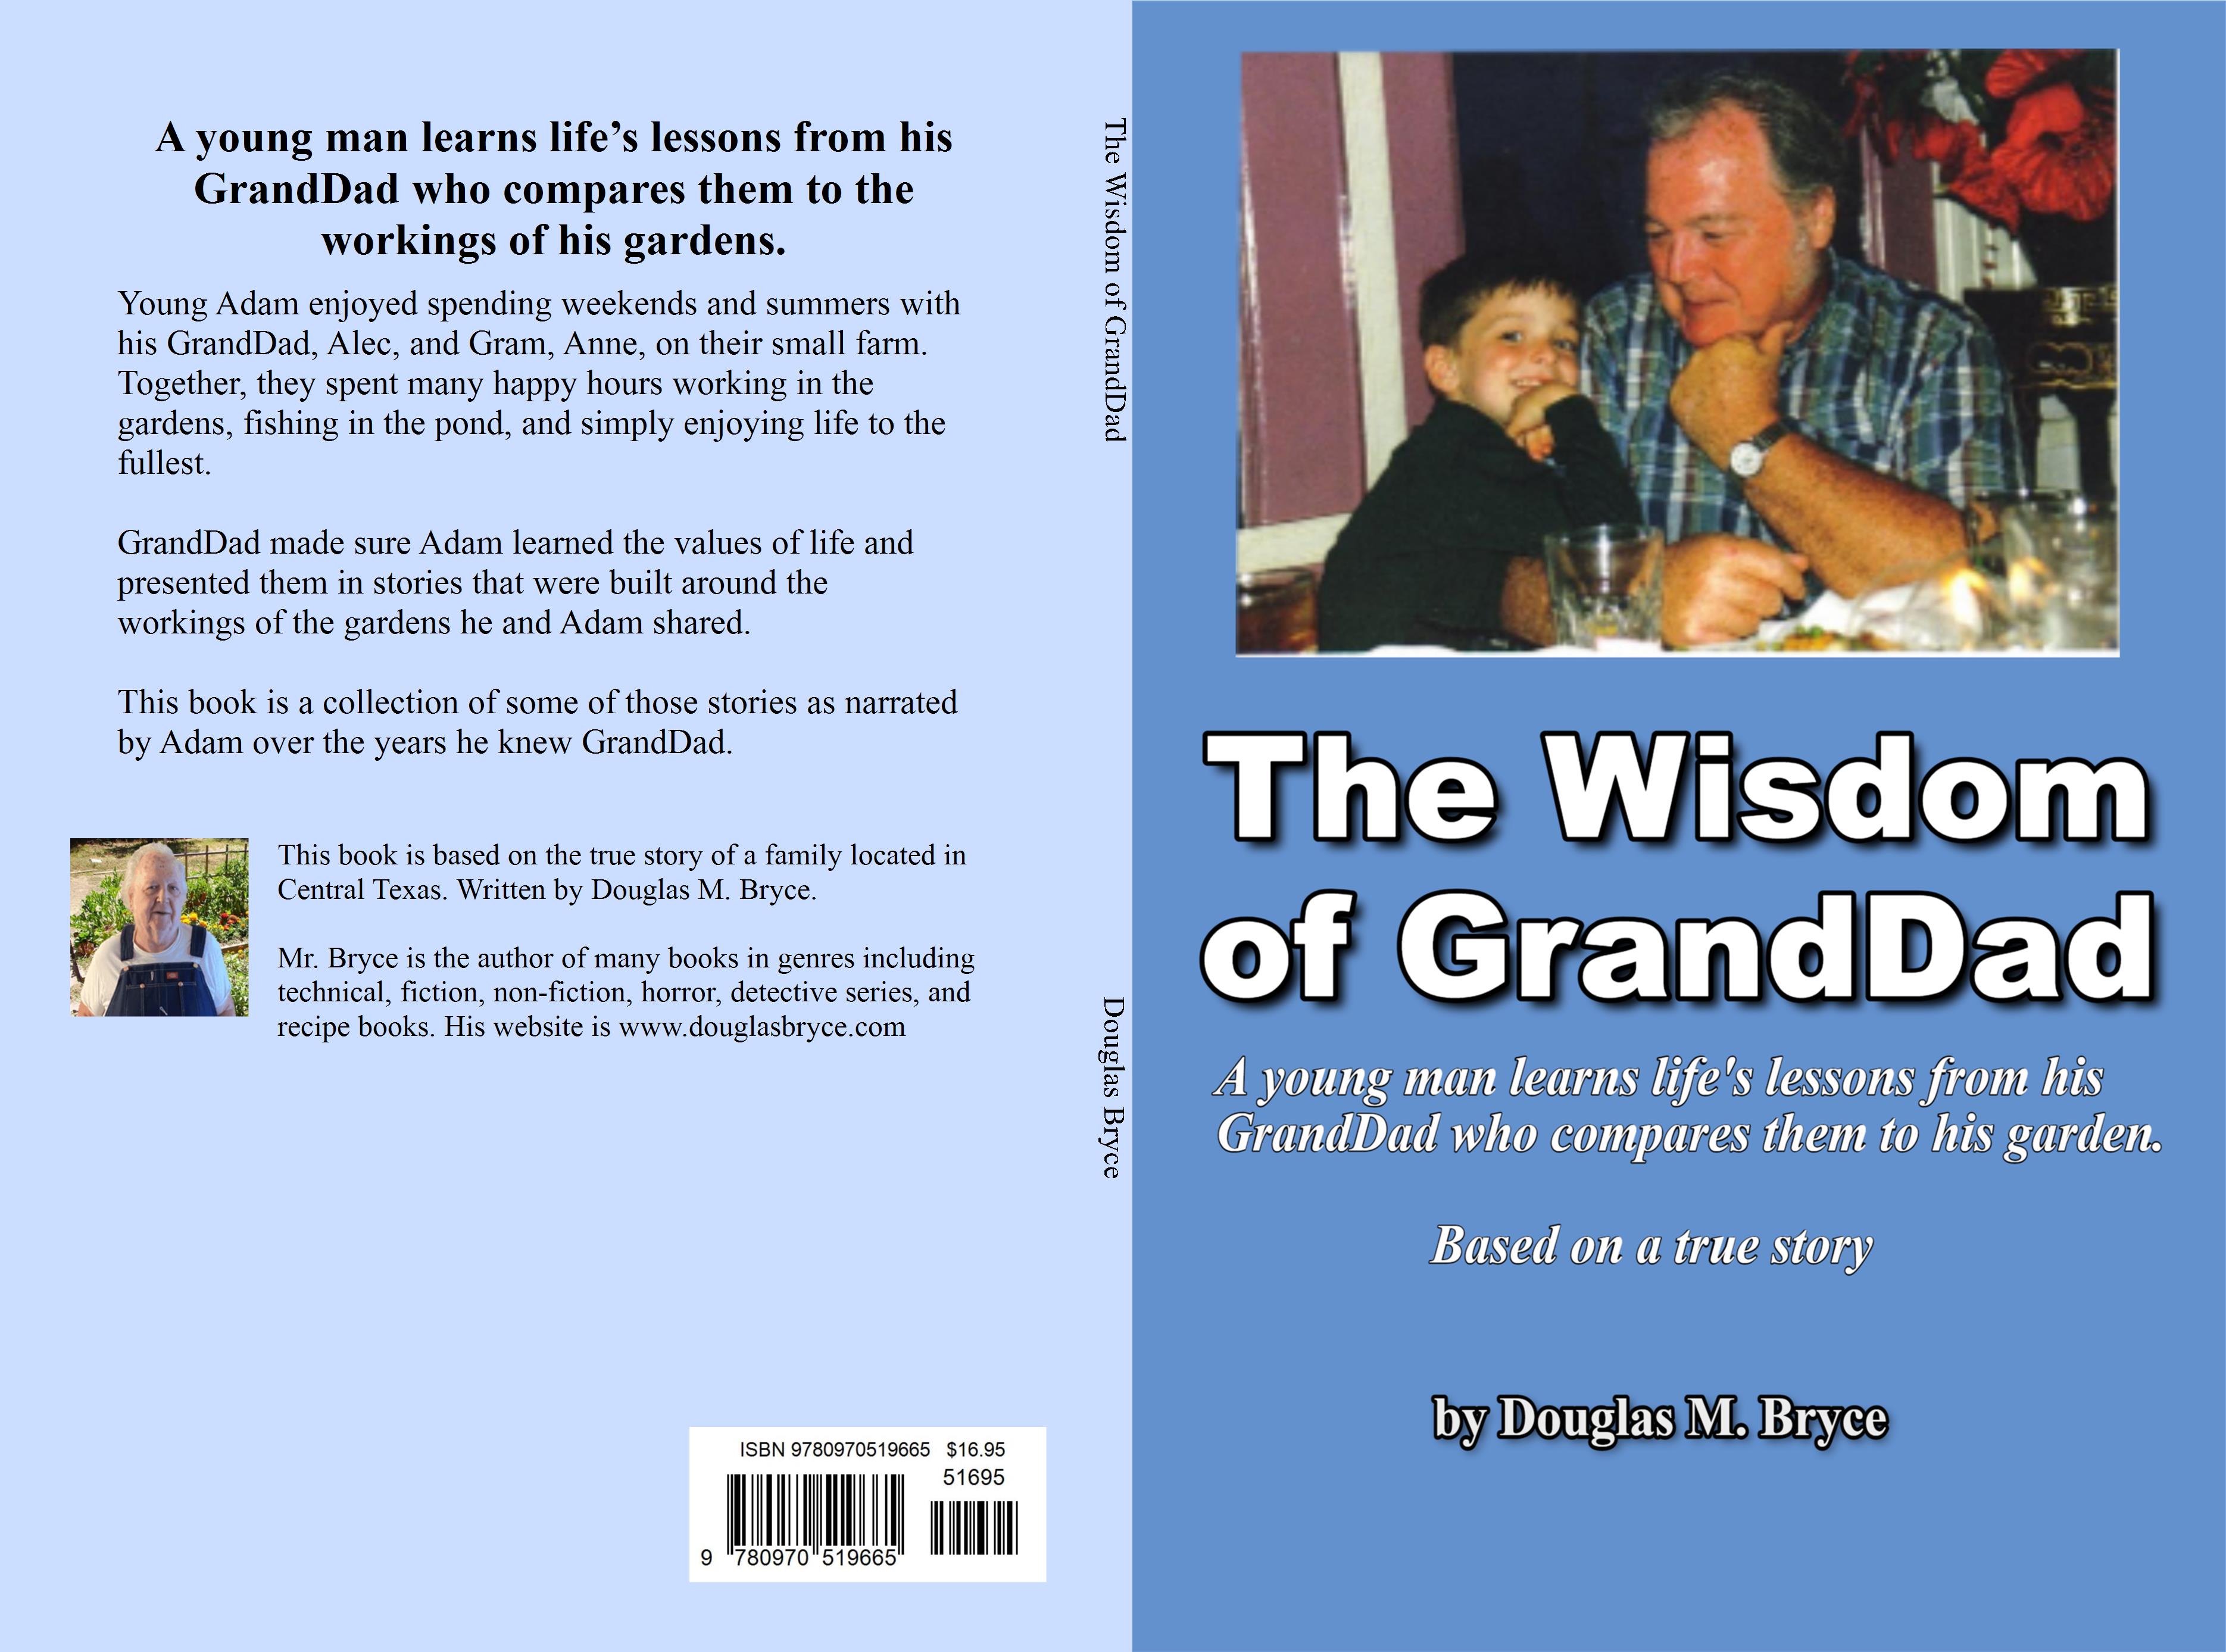 The Wisdom of GrandDad cover image